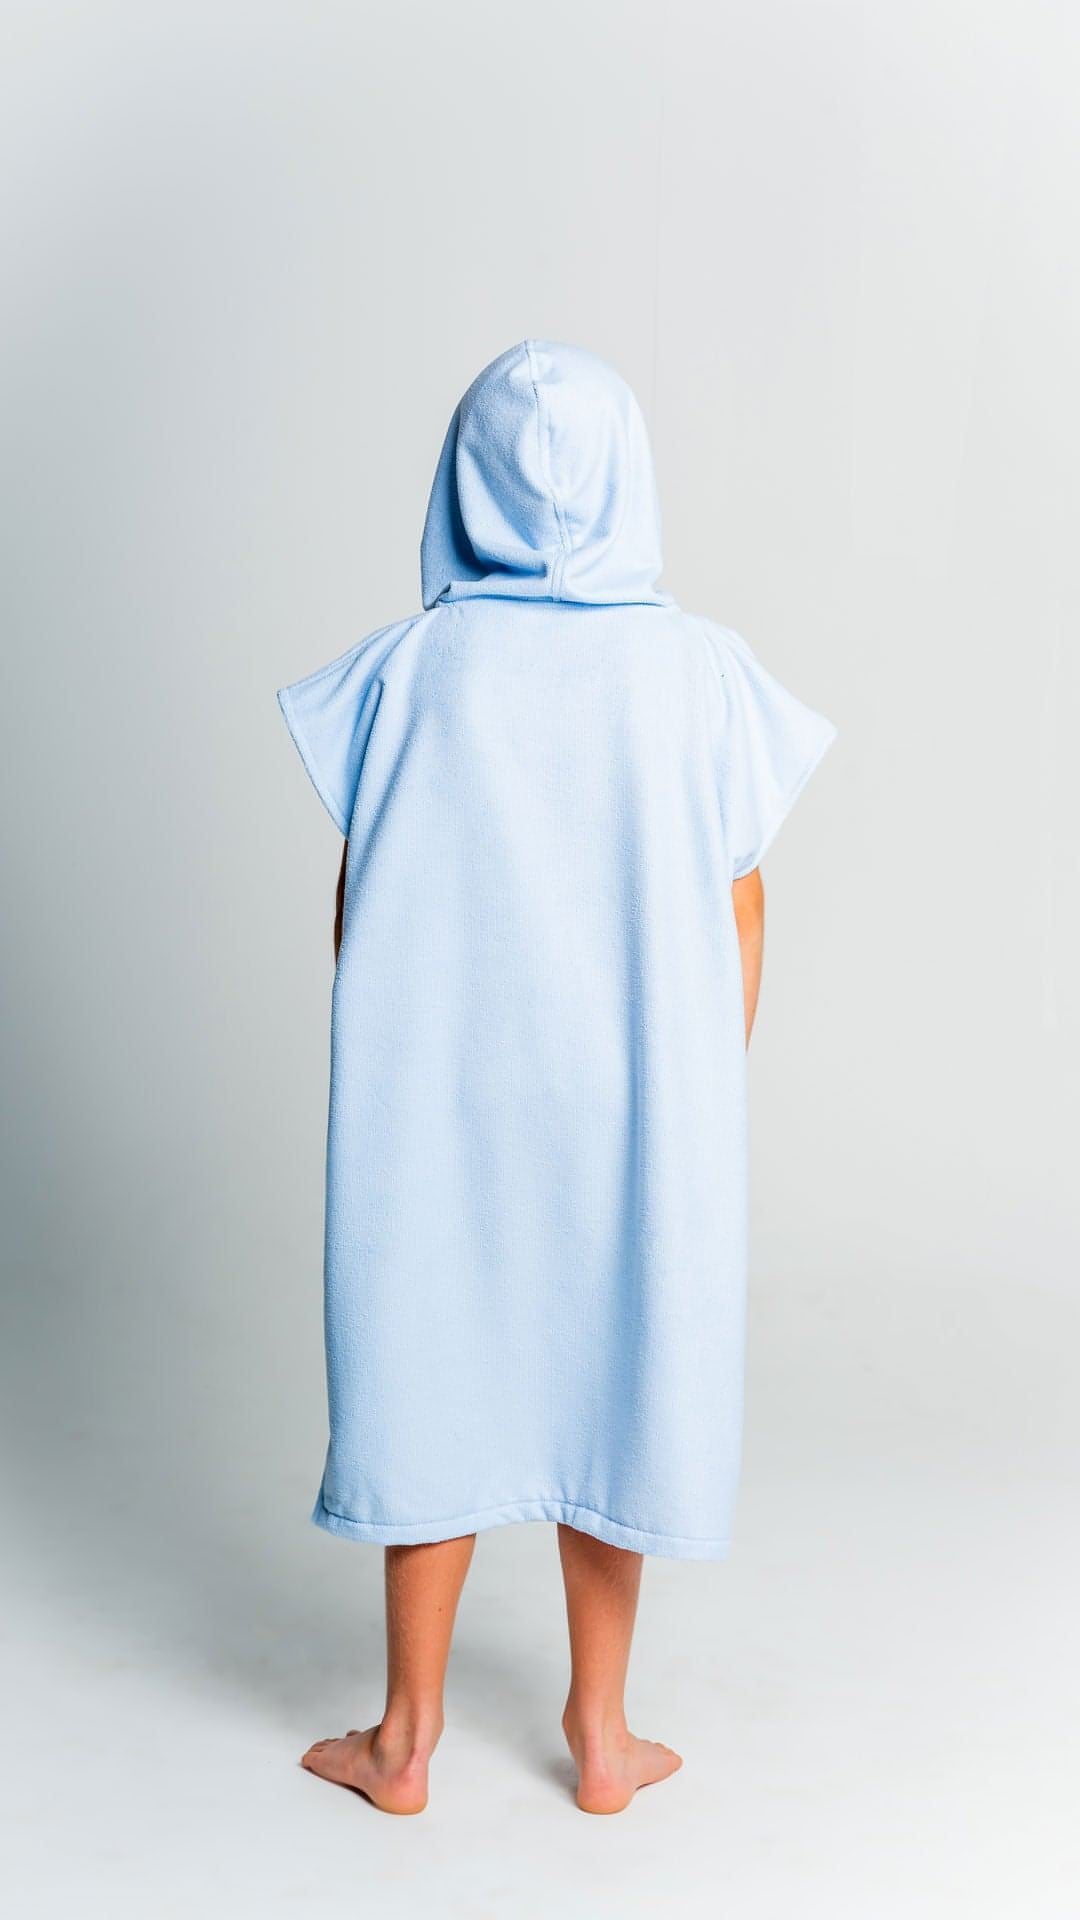 Hooded Towel Youth, Kids, Boys, Girls - Blue back with Hood on